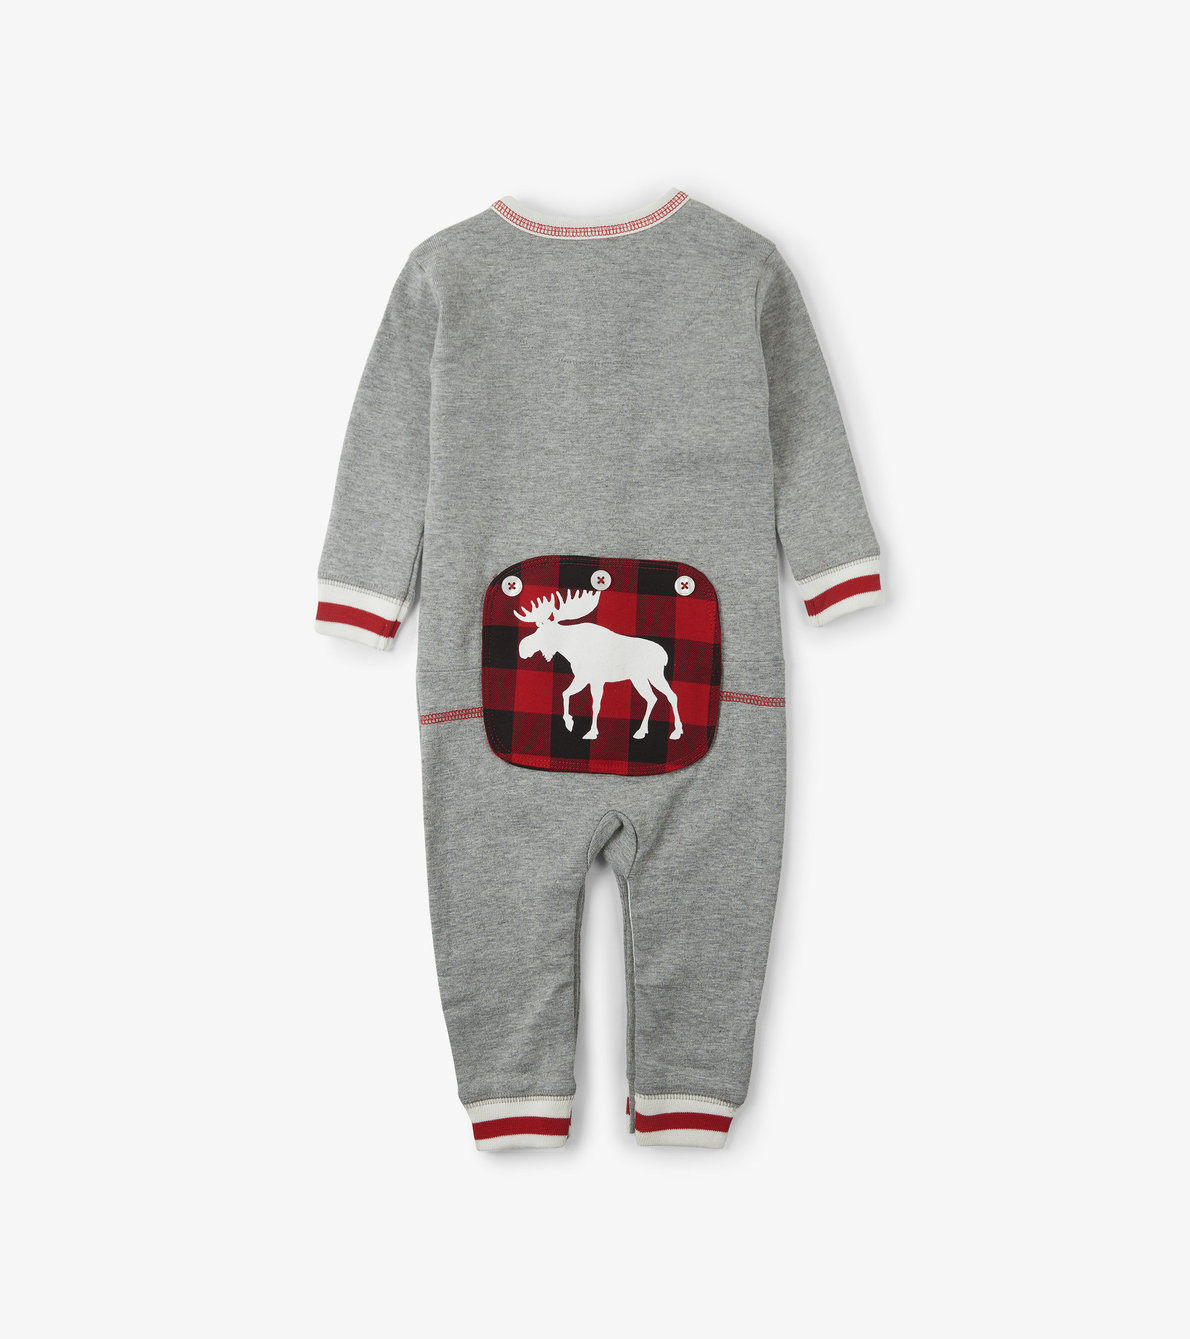 View larger image of Canadiana Moose Baby Union Suit